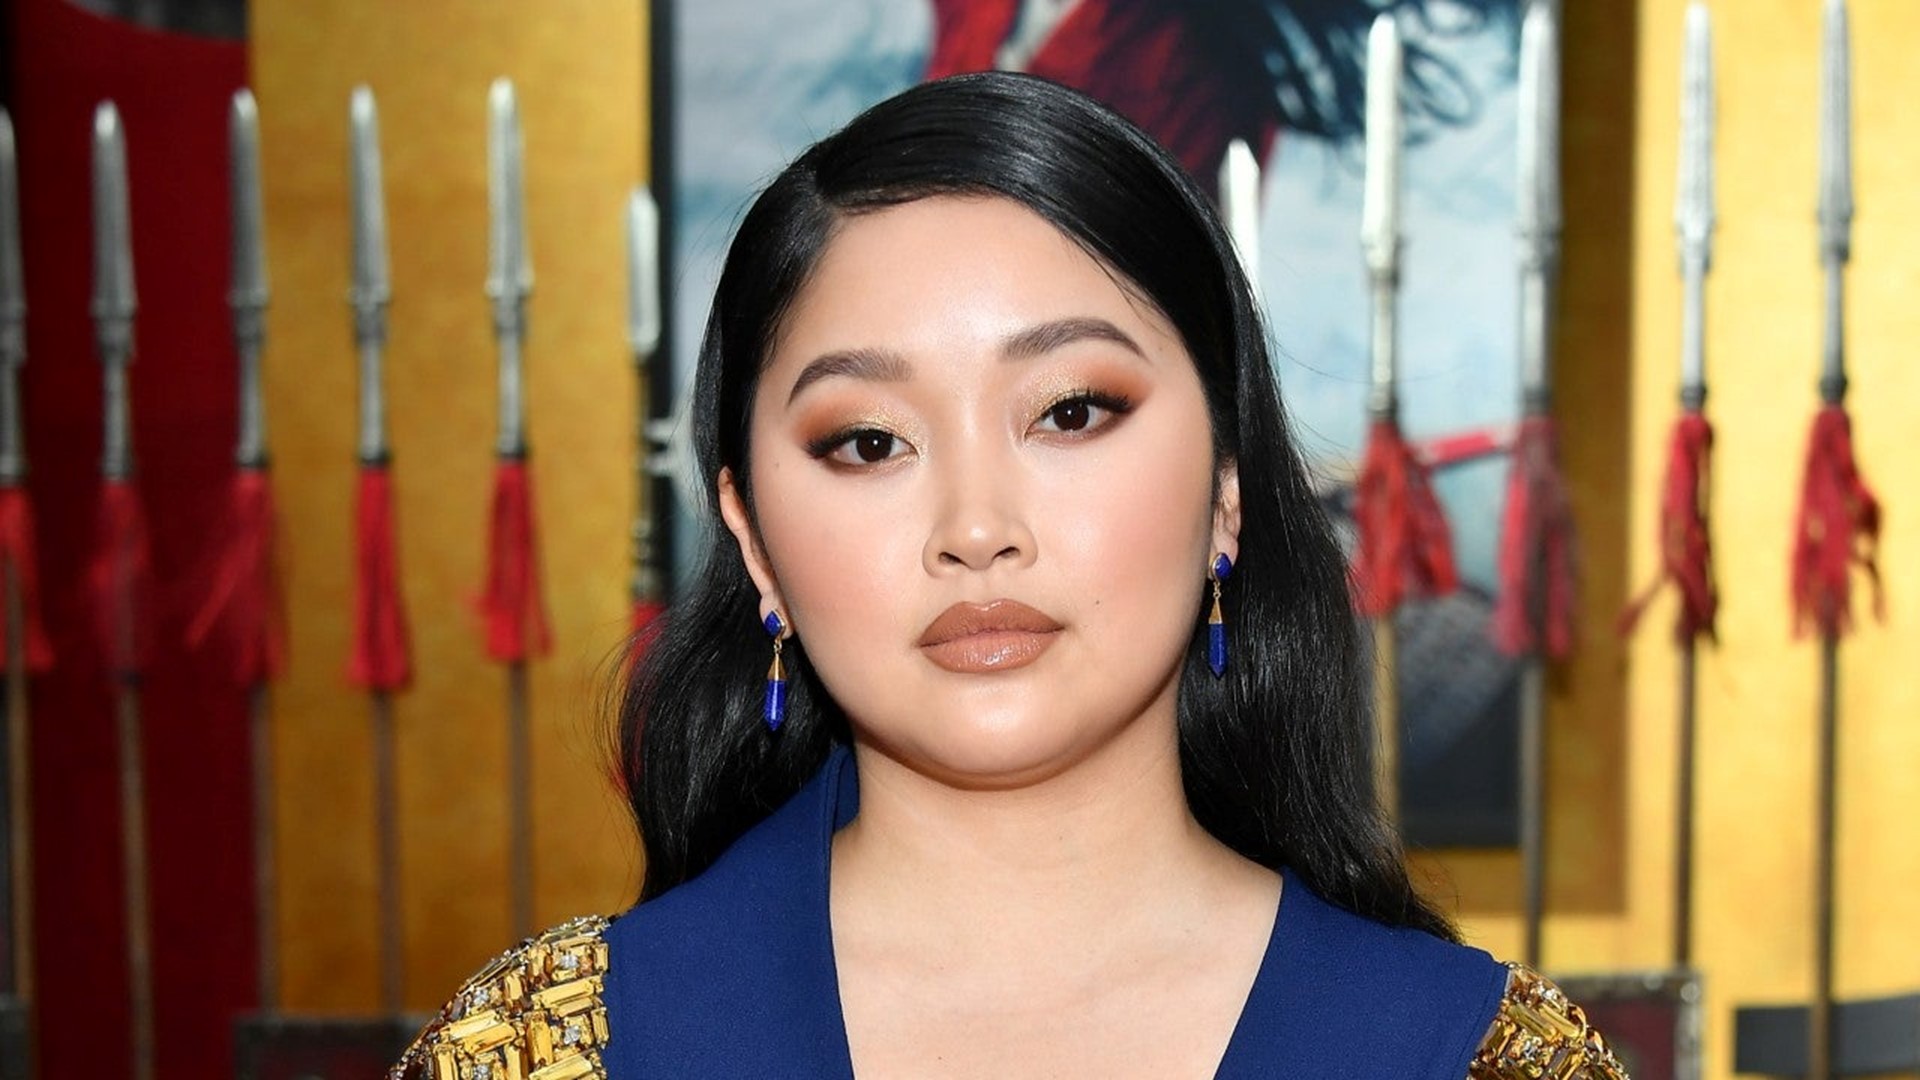 Lana Condor Calls Out President Trump For Racist Words And Actions Toward Asian Community Amid